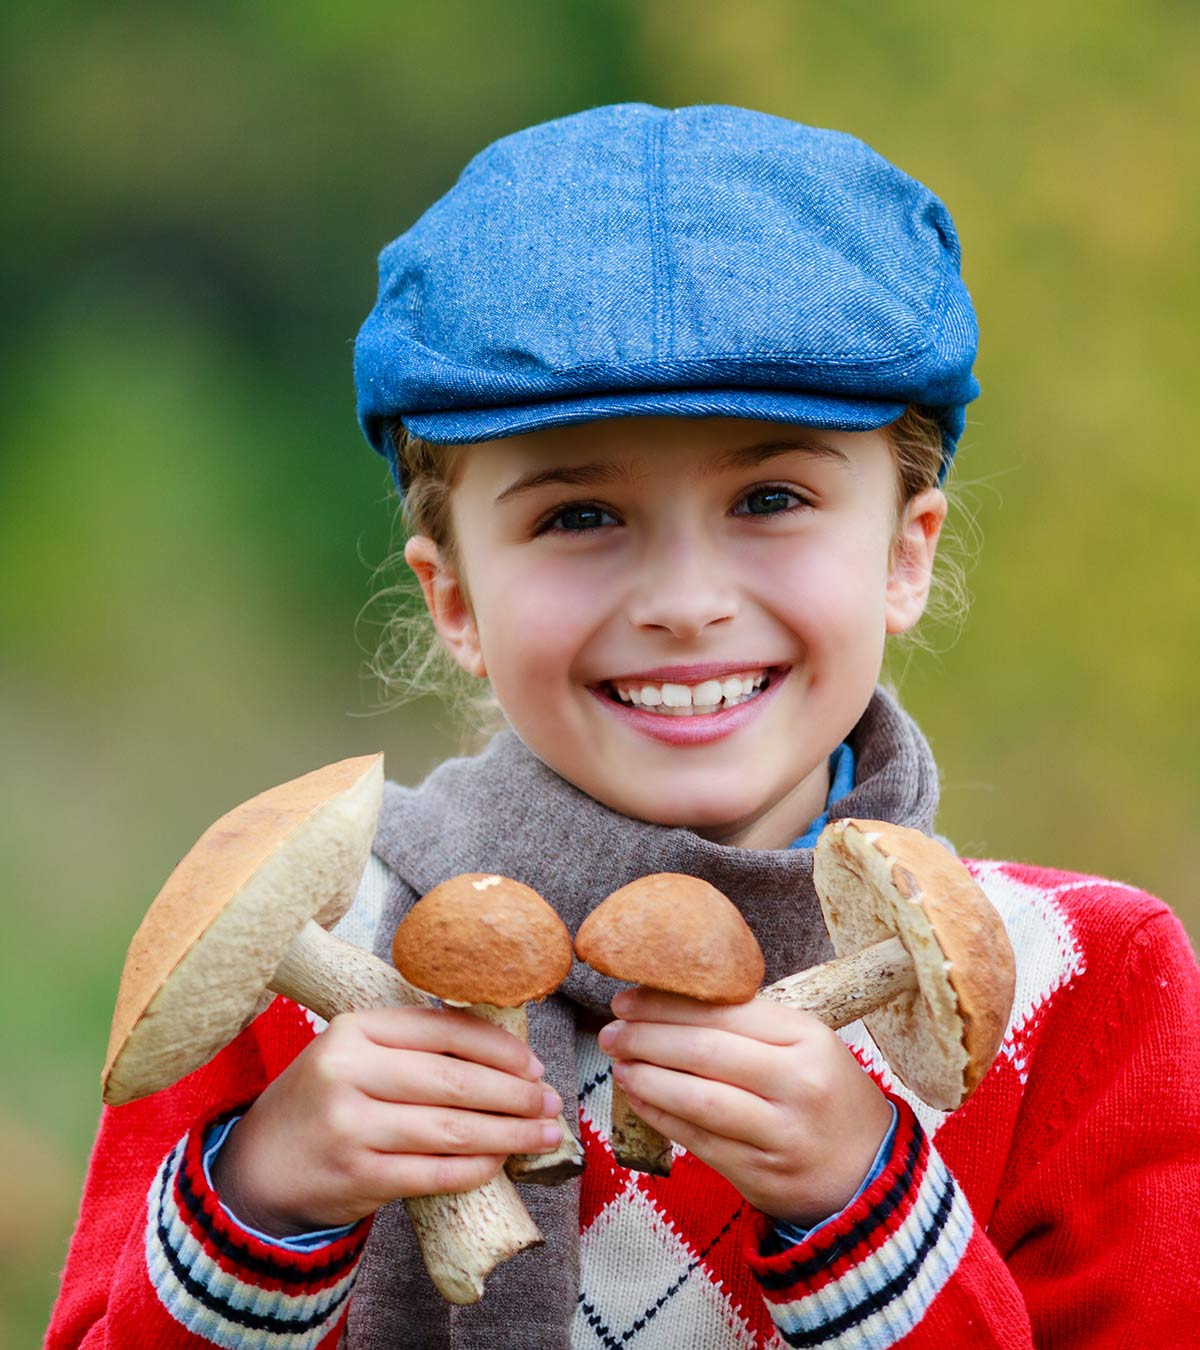 6 Health Benefits Of Mushrooms For Kids And Recipes